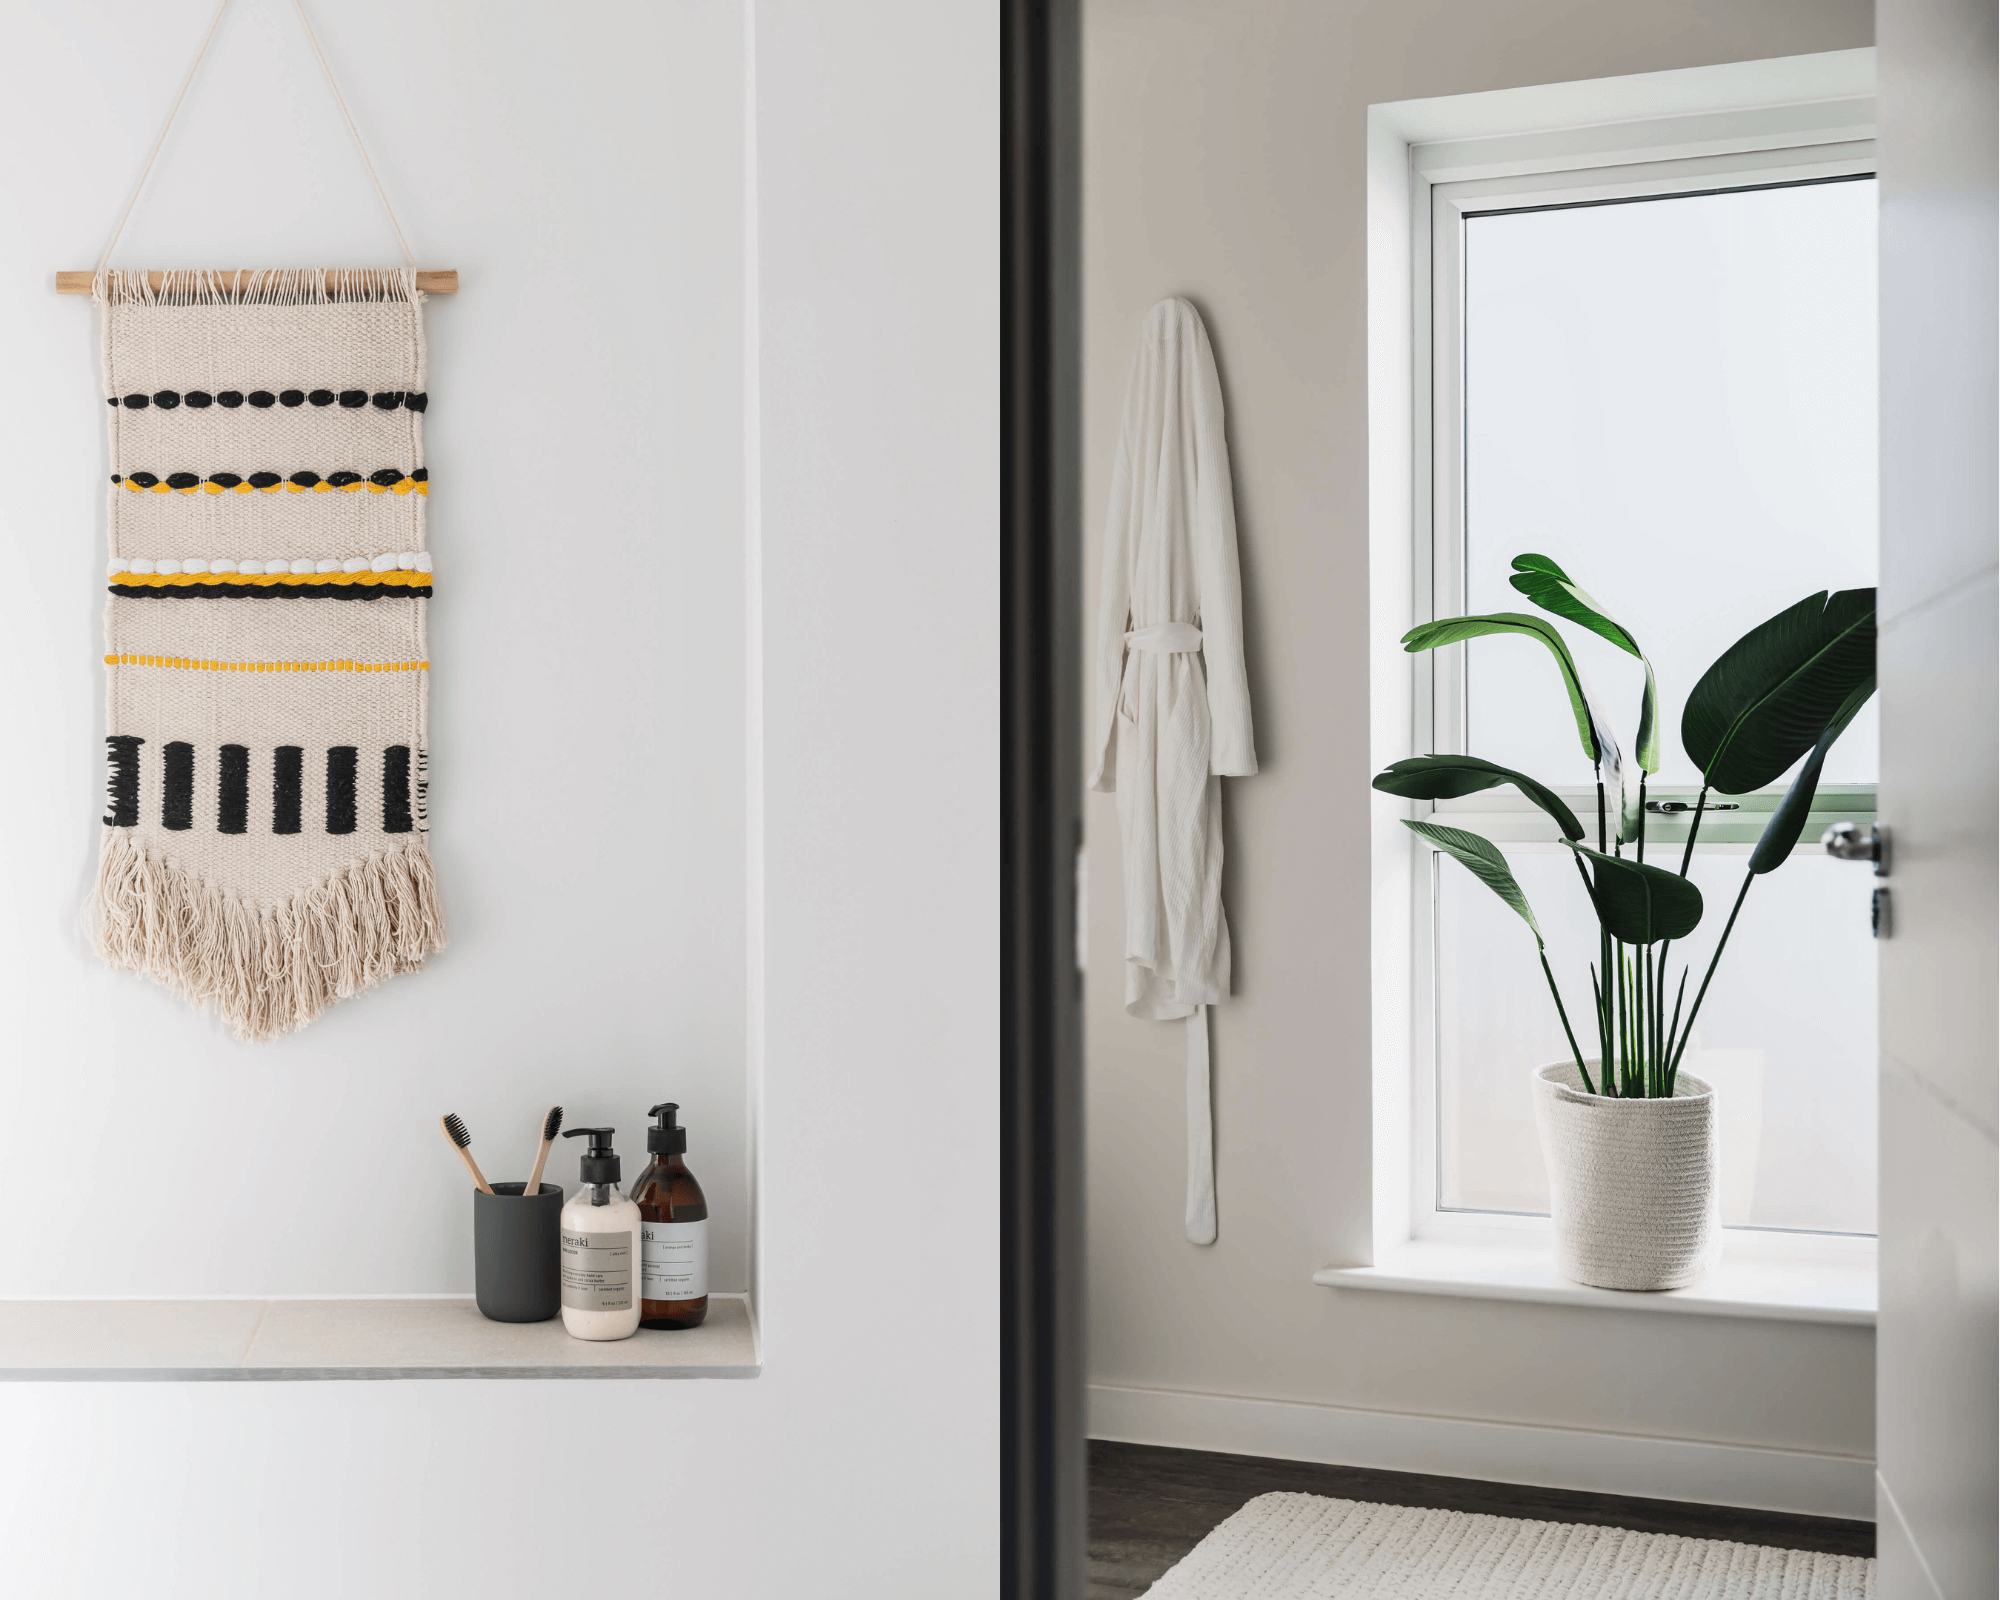 Neutral, light bathroom with plants and macrame wall hanging.